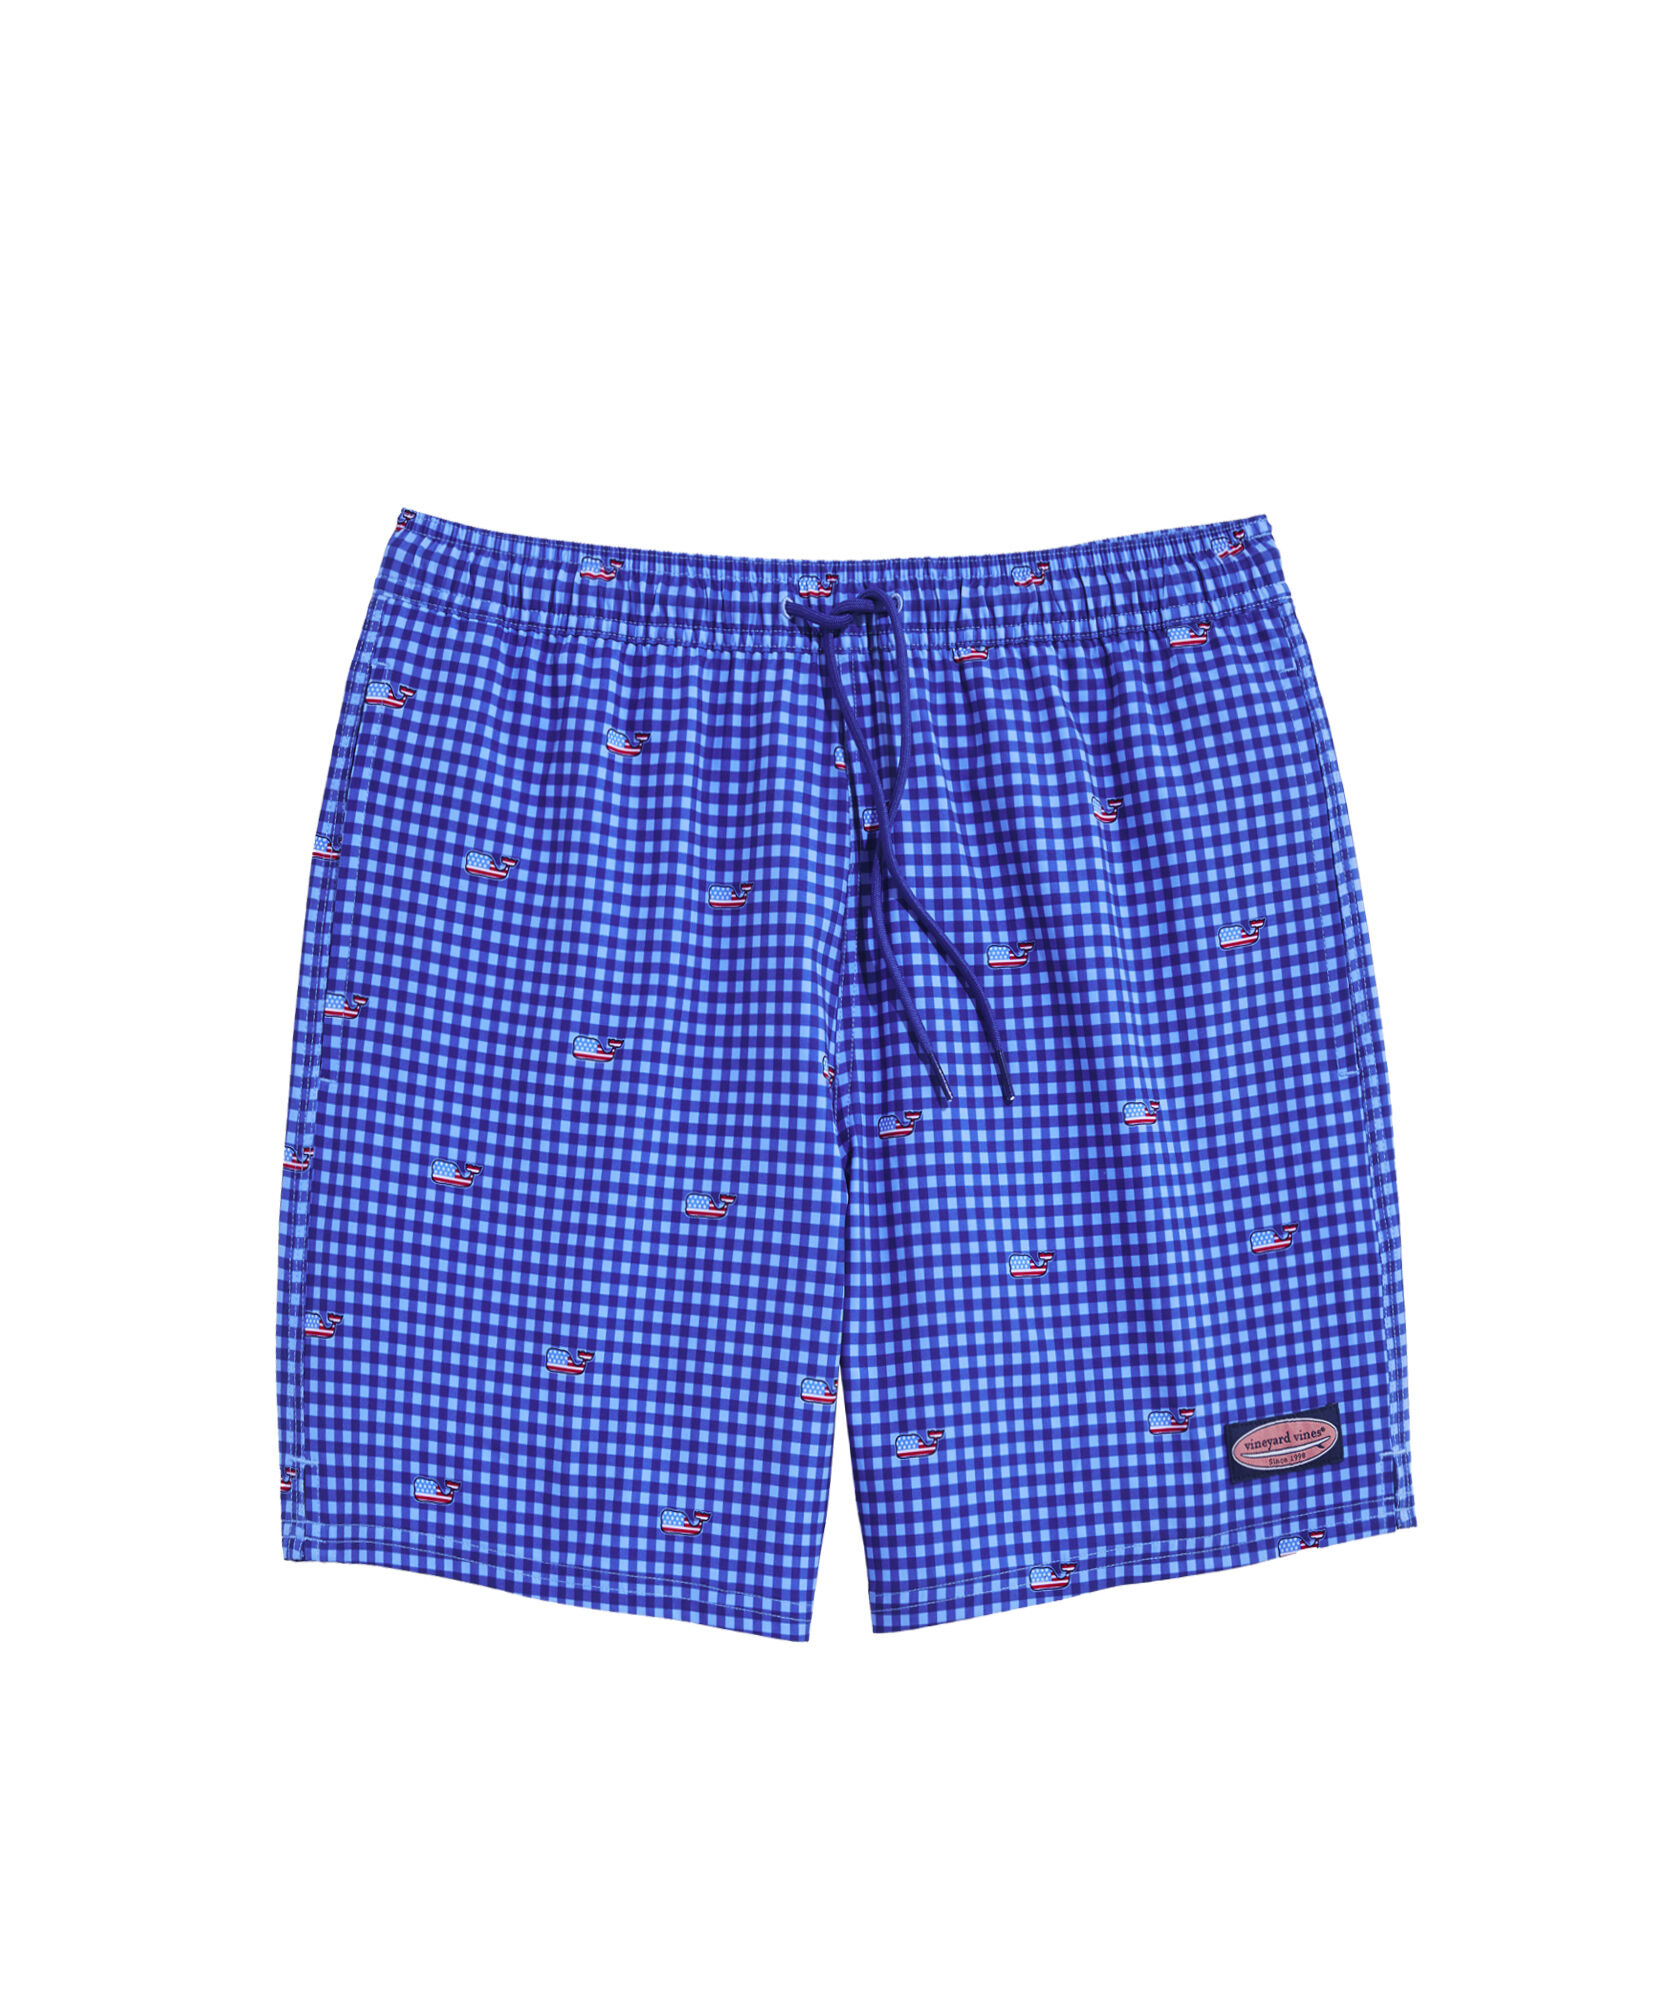 OUTLET Printed Chappy Swim Trunks